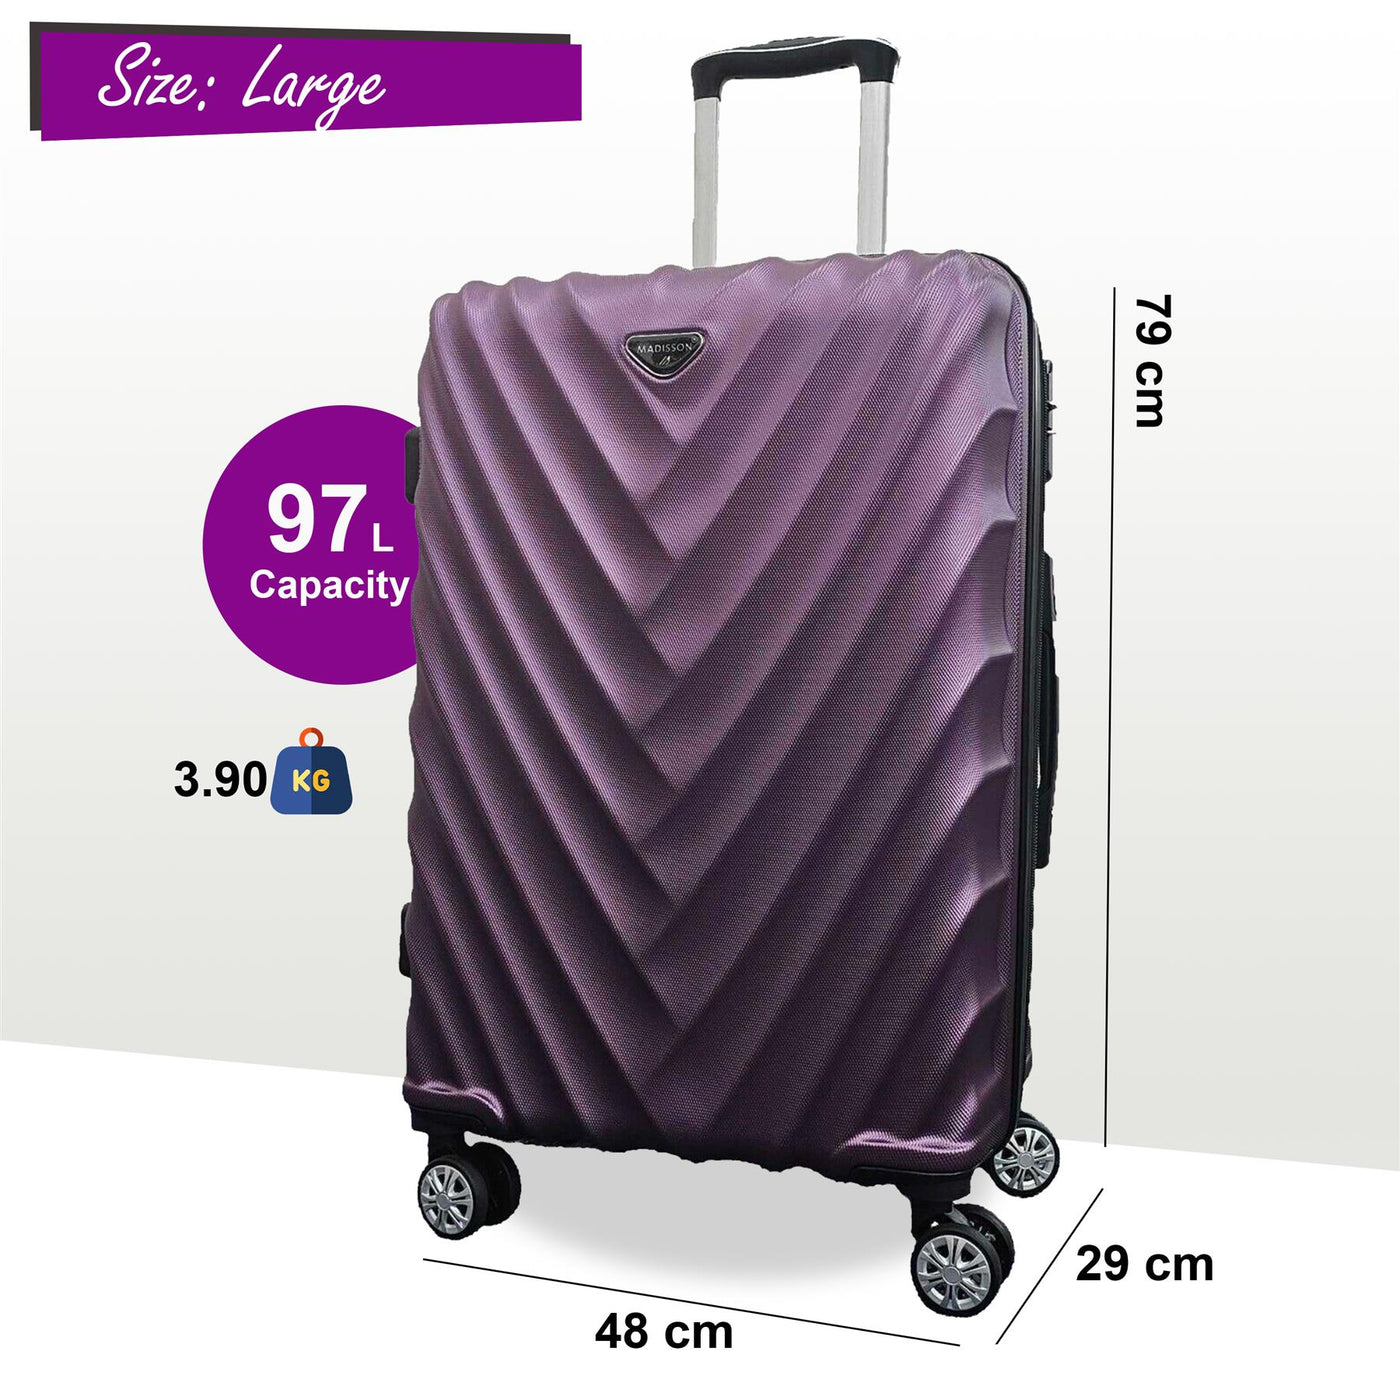 Strong ABS Hard Shell Luggage Suitcase